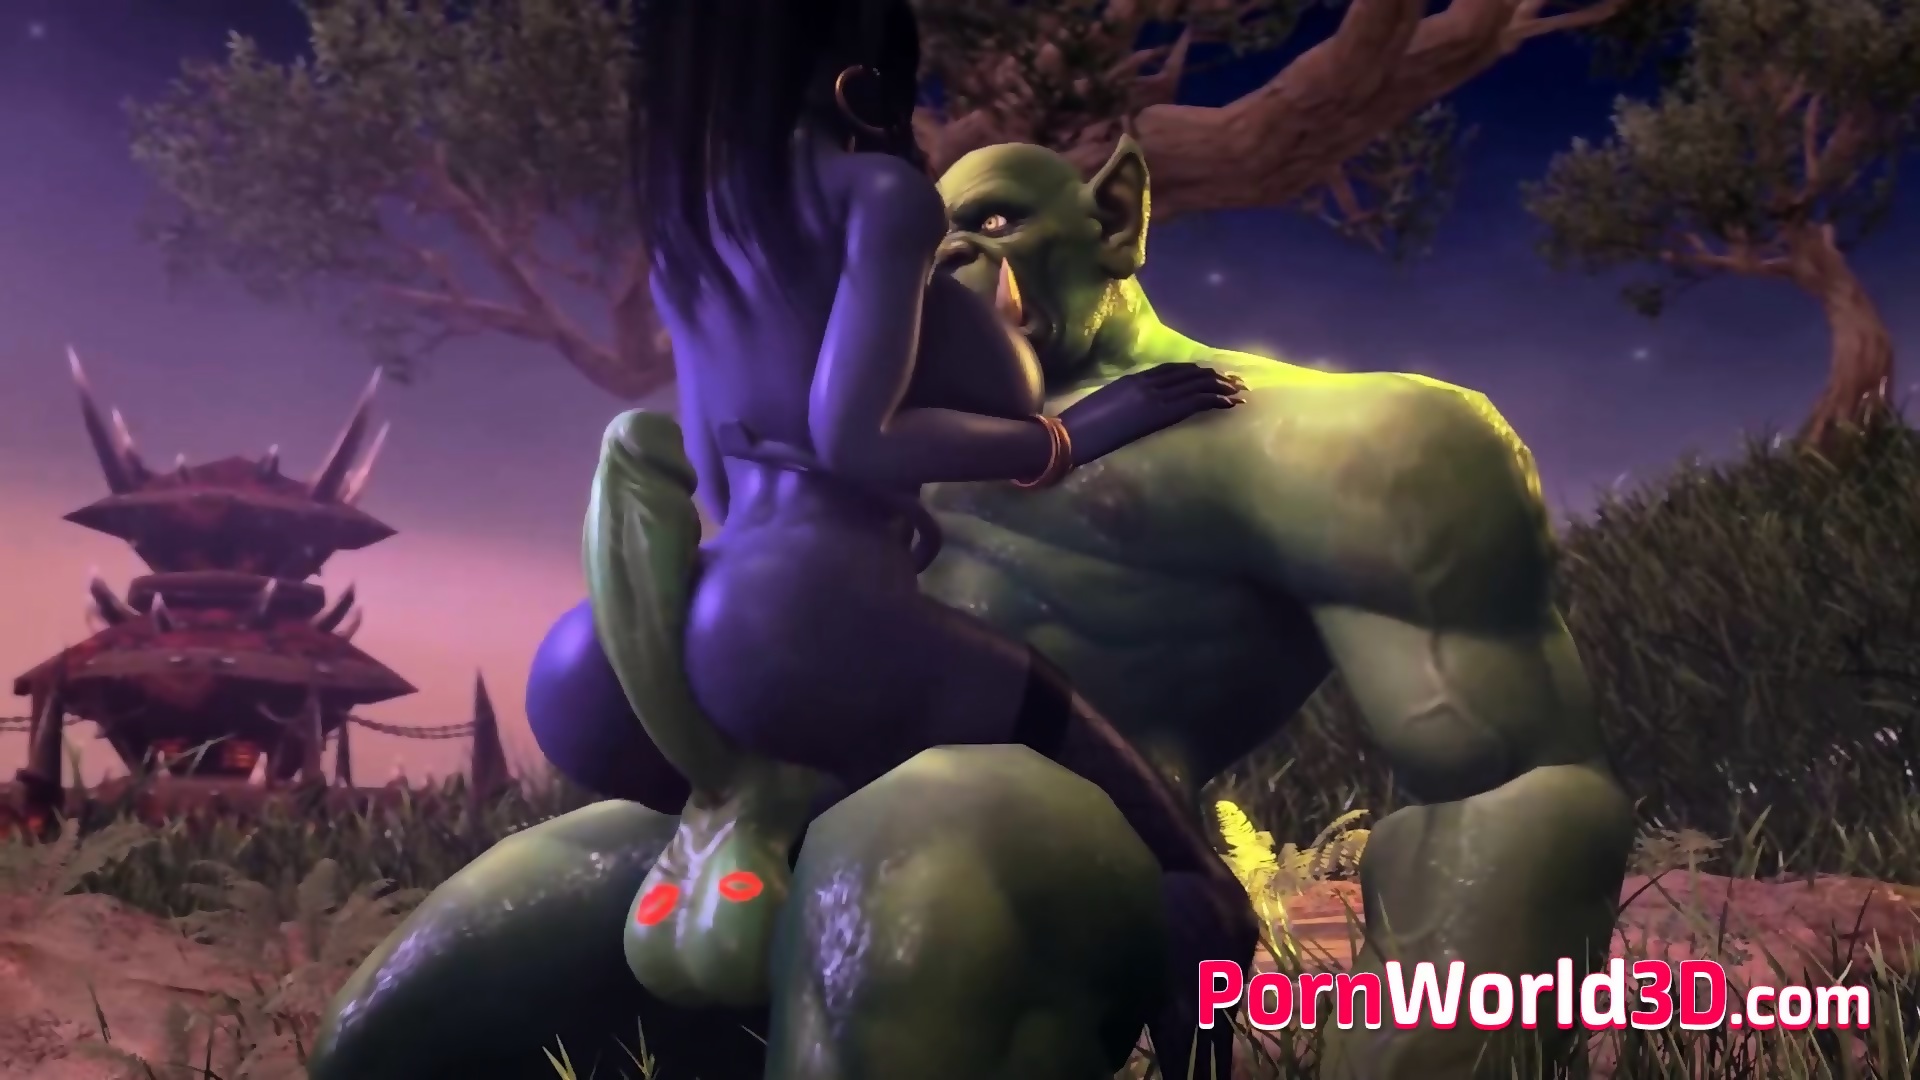 home made amature sex 3s warcraft Adult Pics Hq